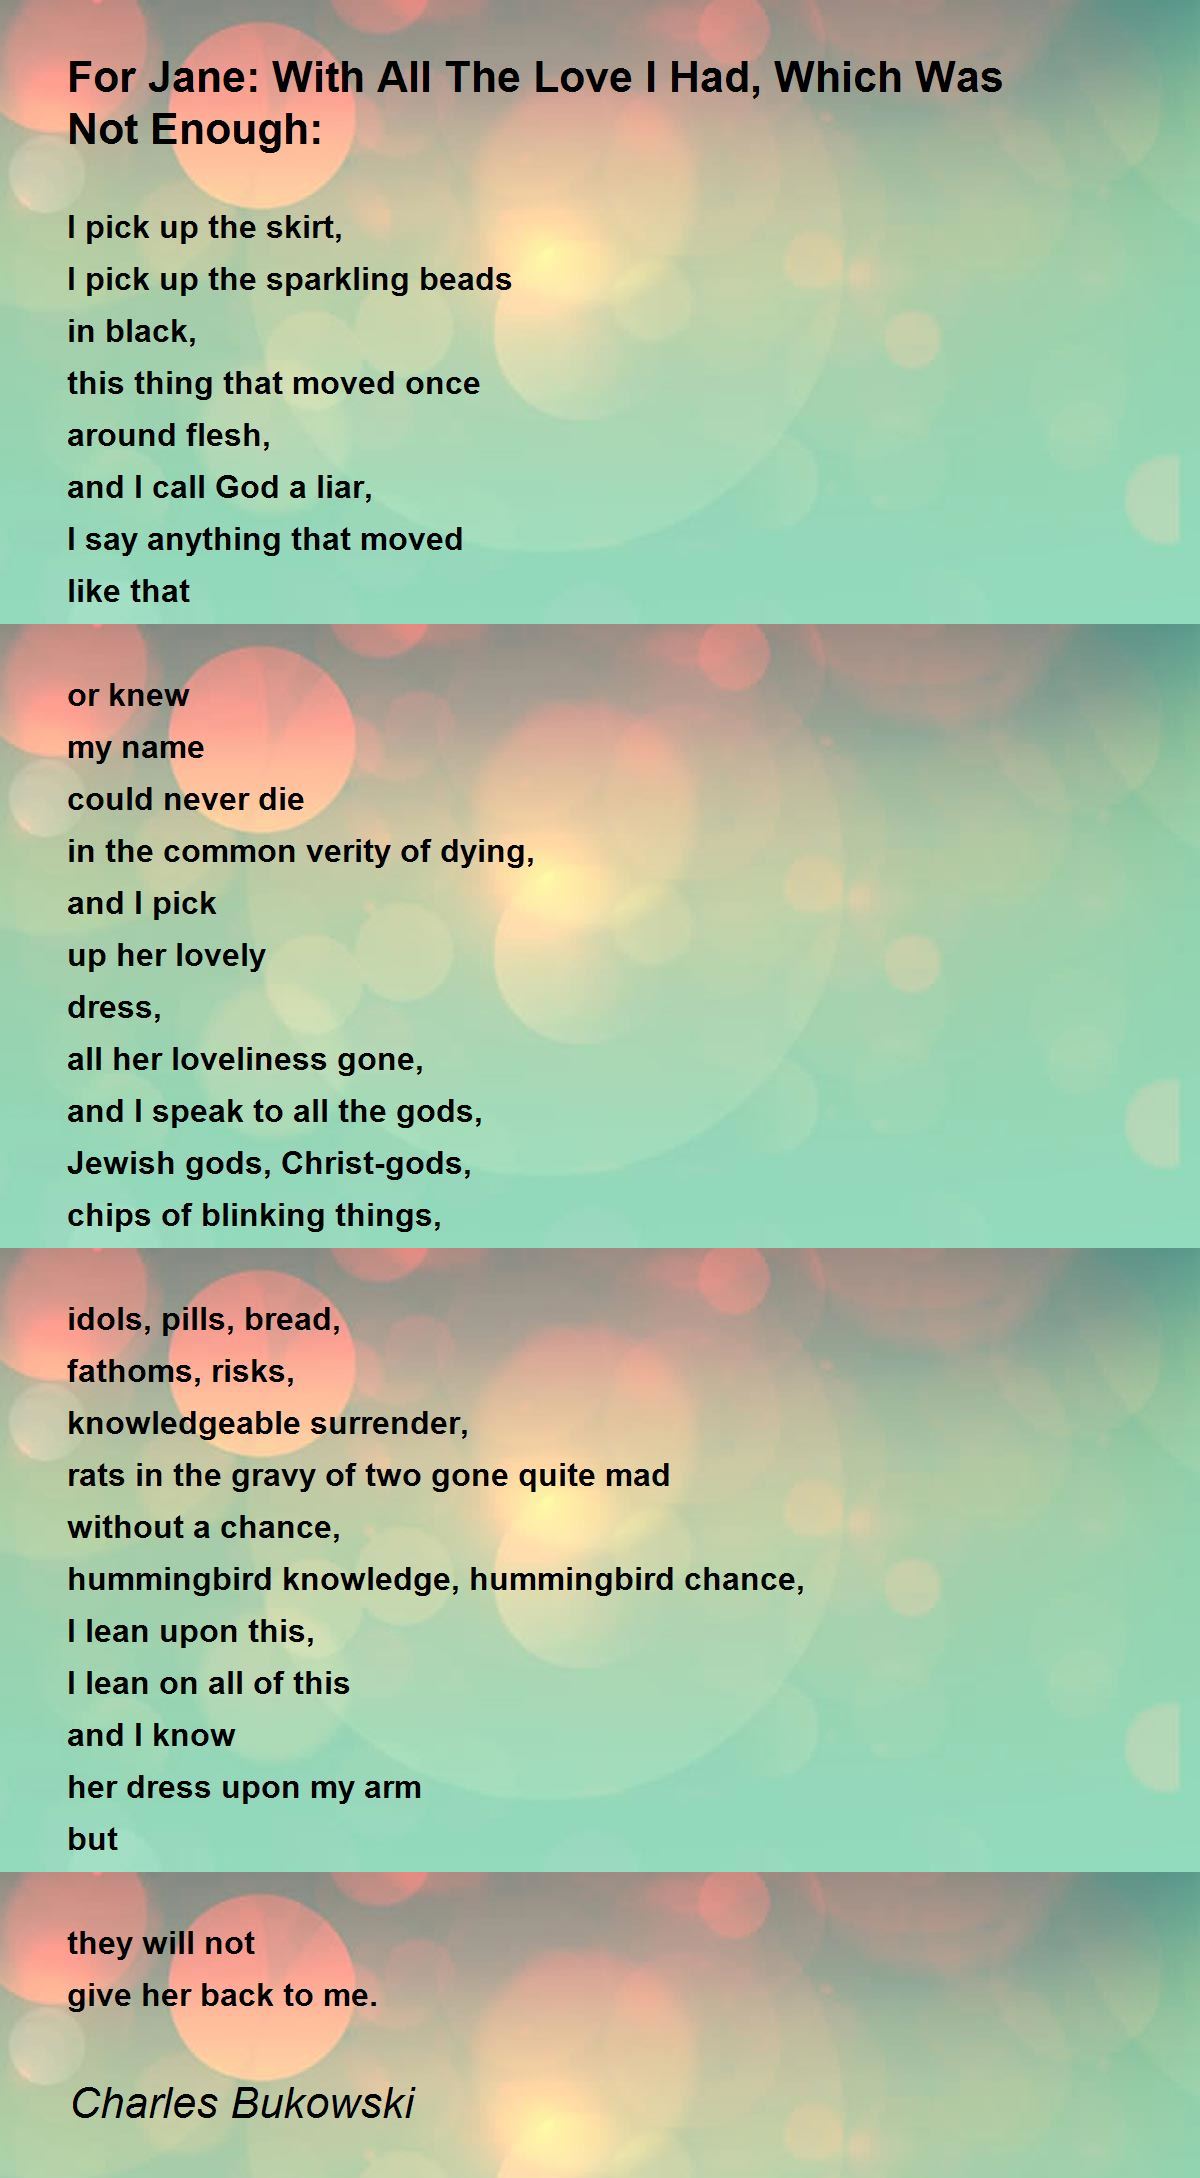 For Jane: With All The Love I Had, Which Was Not Enough: Poem by Charles Bukowski - Poem Hunter